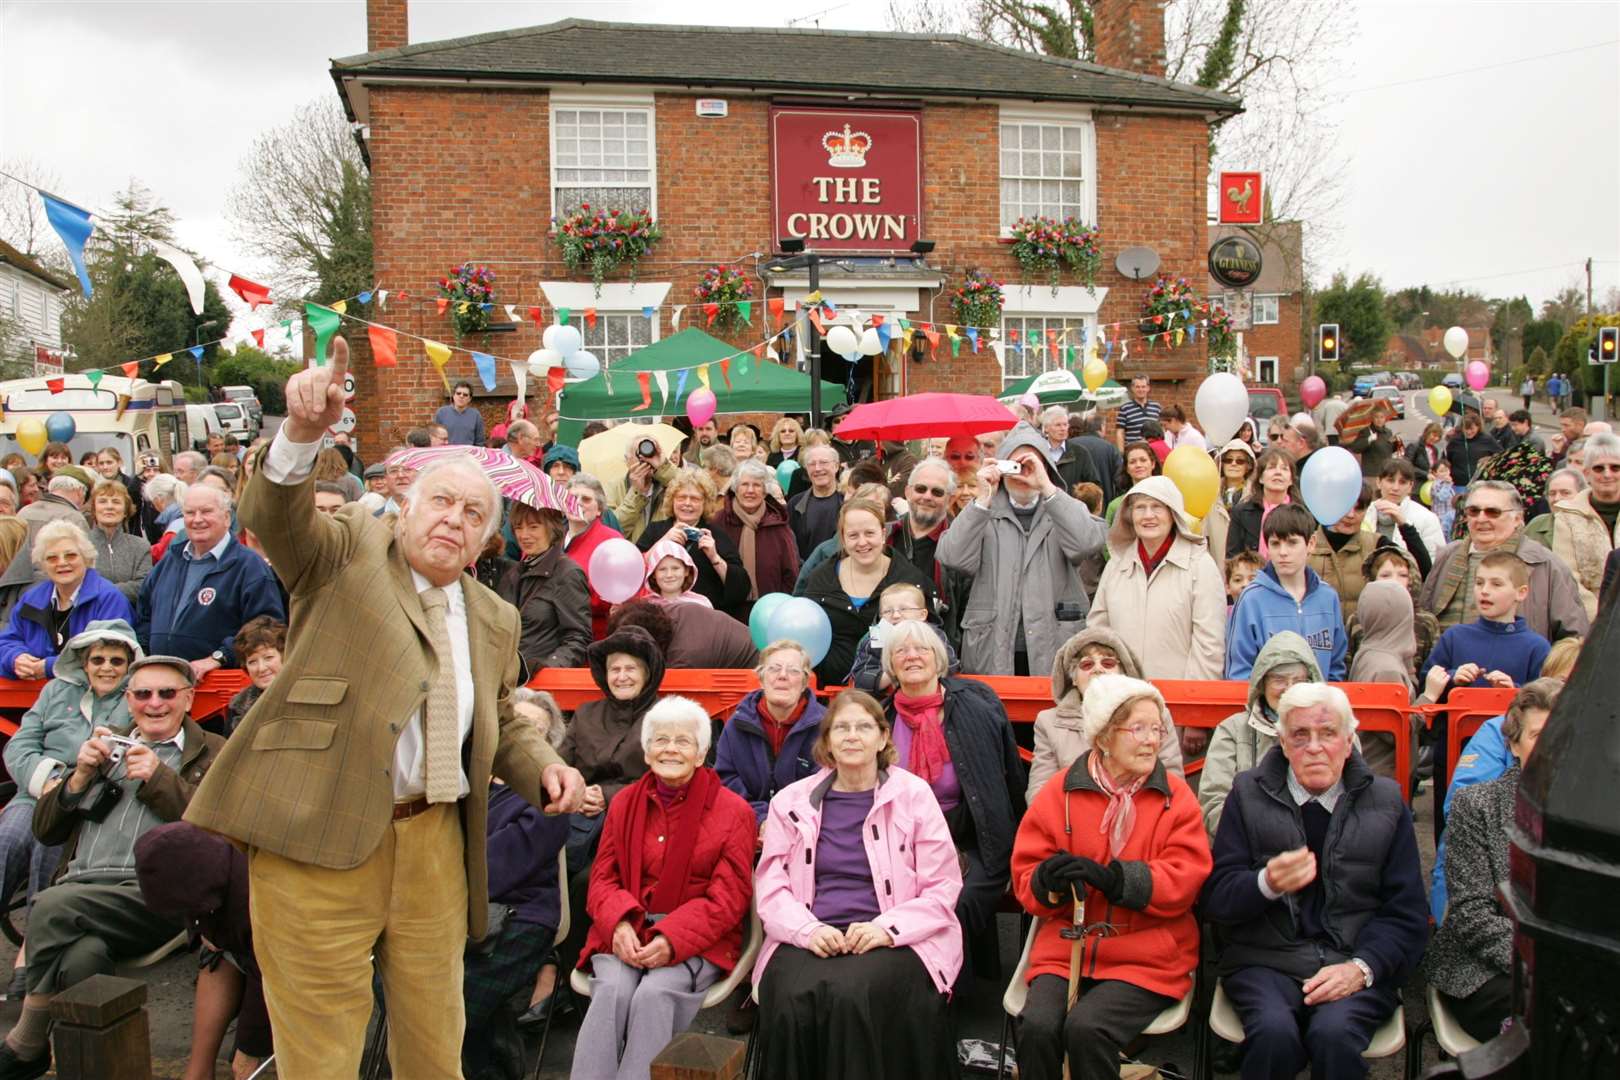 Outside The Crown pub in St Michaels, near Tenterden, in March 2008 where actor Sir Donald Sinden unveiled a new sign. The pub, which dates back to 1832, is still going today